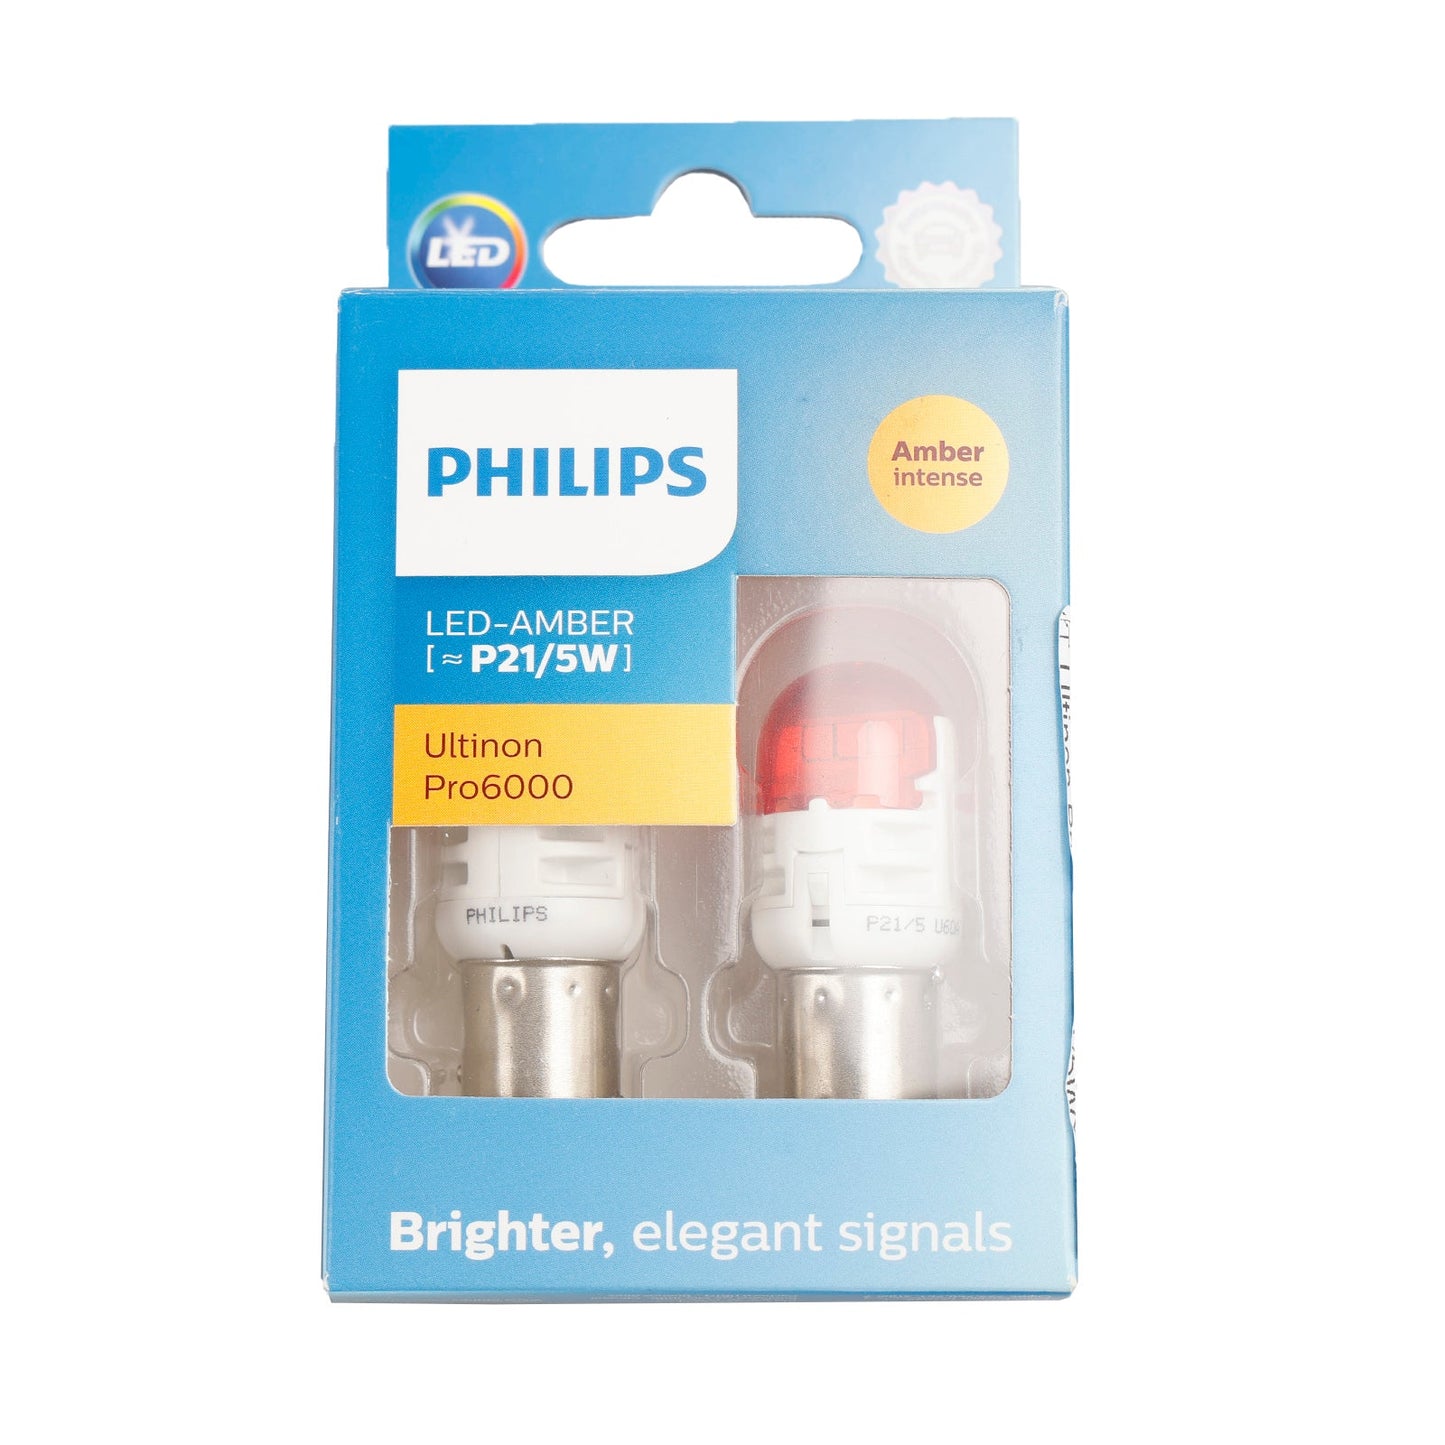 Für Philips 11499AU60X2 Ultinon Pro6000 LED-AMBER P21/5W intensiver AMBER 80/16lm